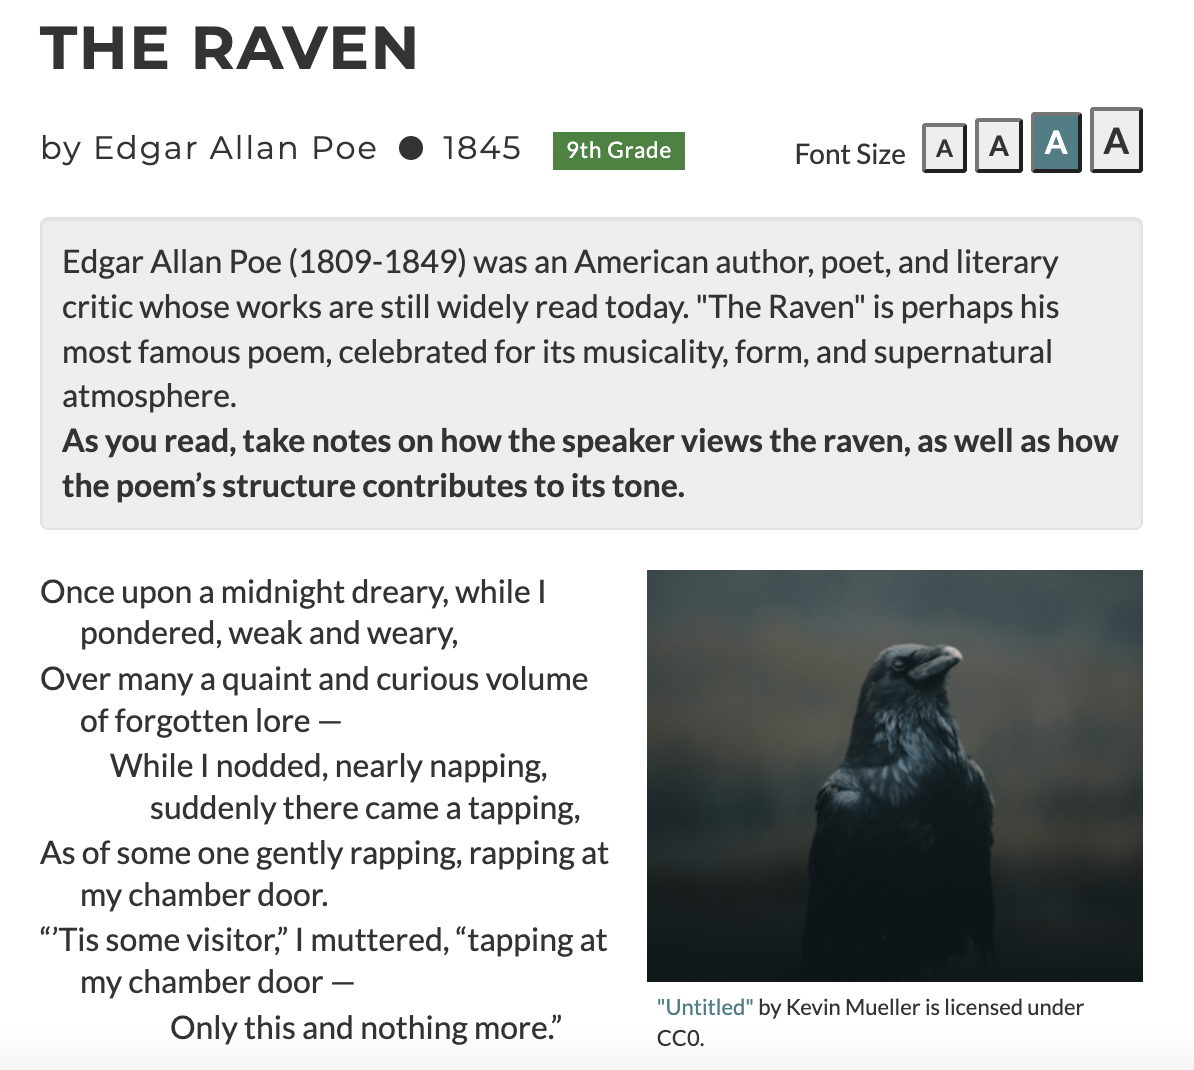 A screenshot of the first few lines of "The Raven" by Edgar Allan Poe.